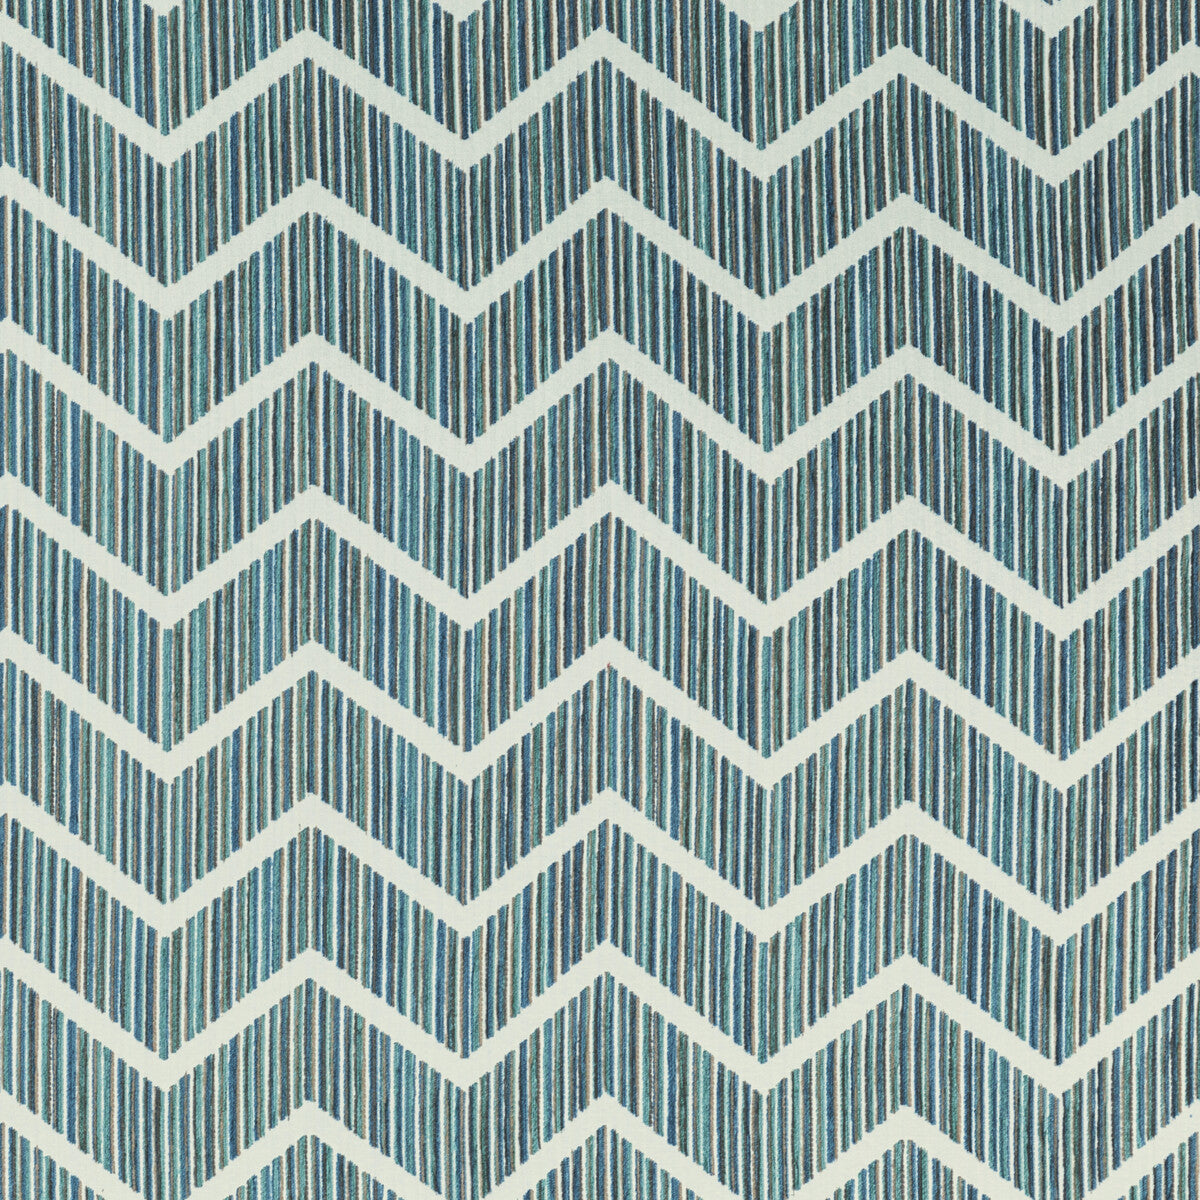 Kravet Design fabric in 36270-535 color - pattern 36270.535.0 - by Kravet Design in the Woven Colors collection